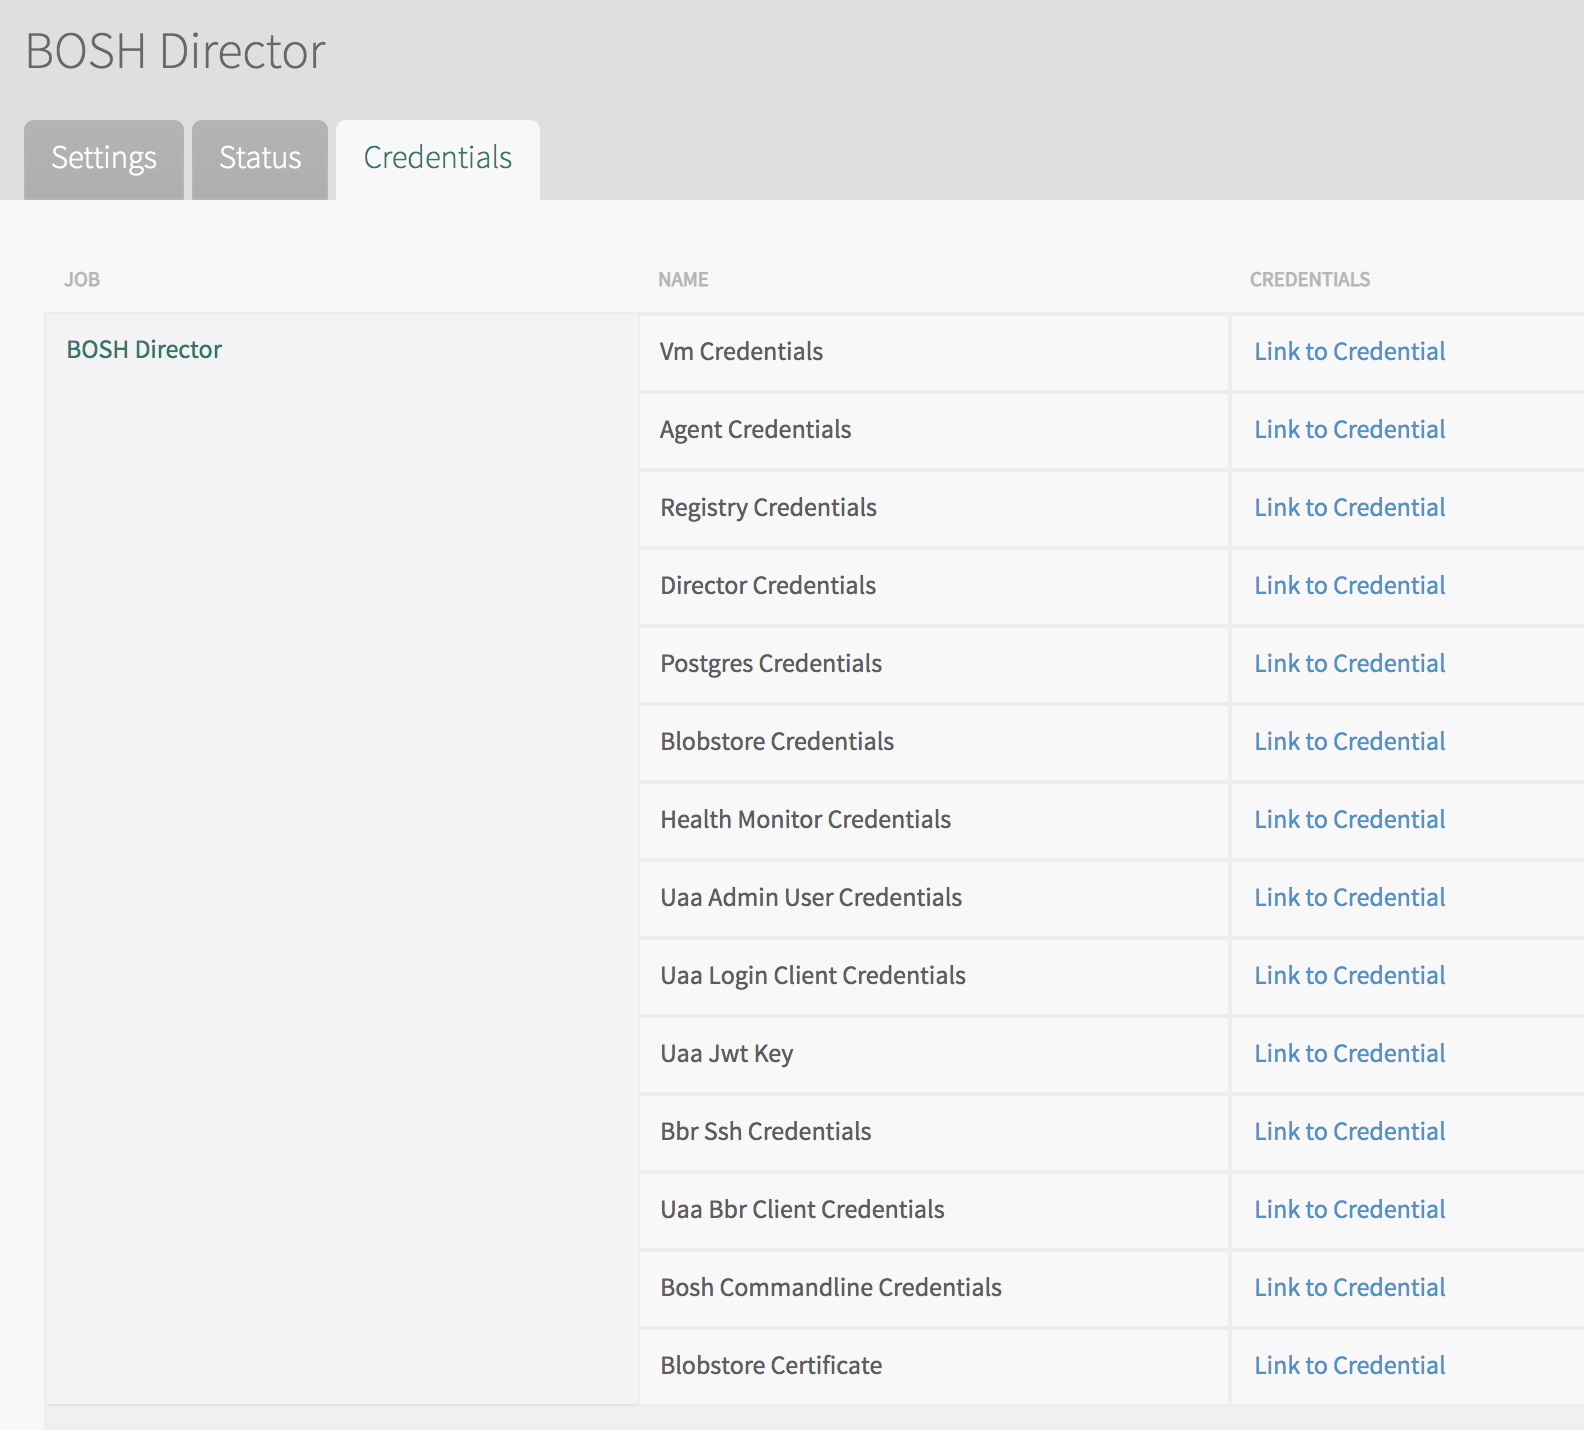 BOSH Director Credentials pane showing links to many types of credentials.